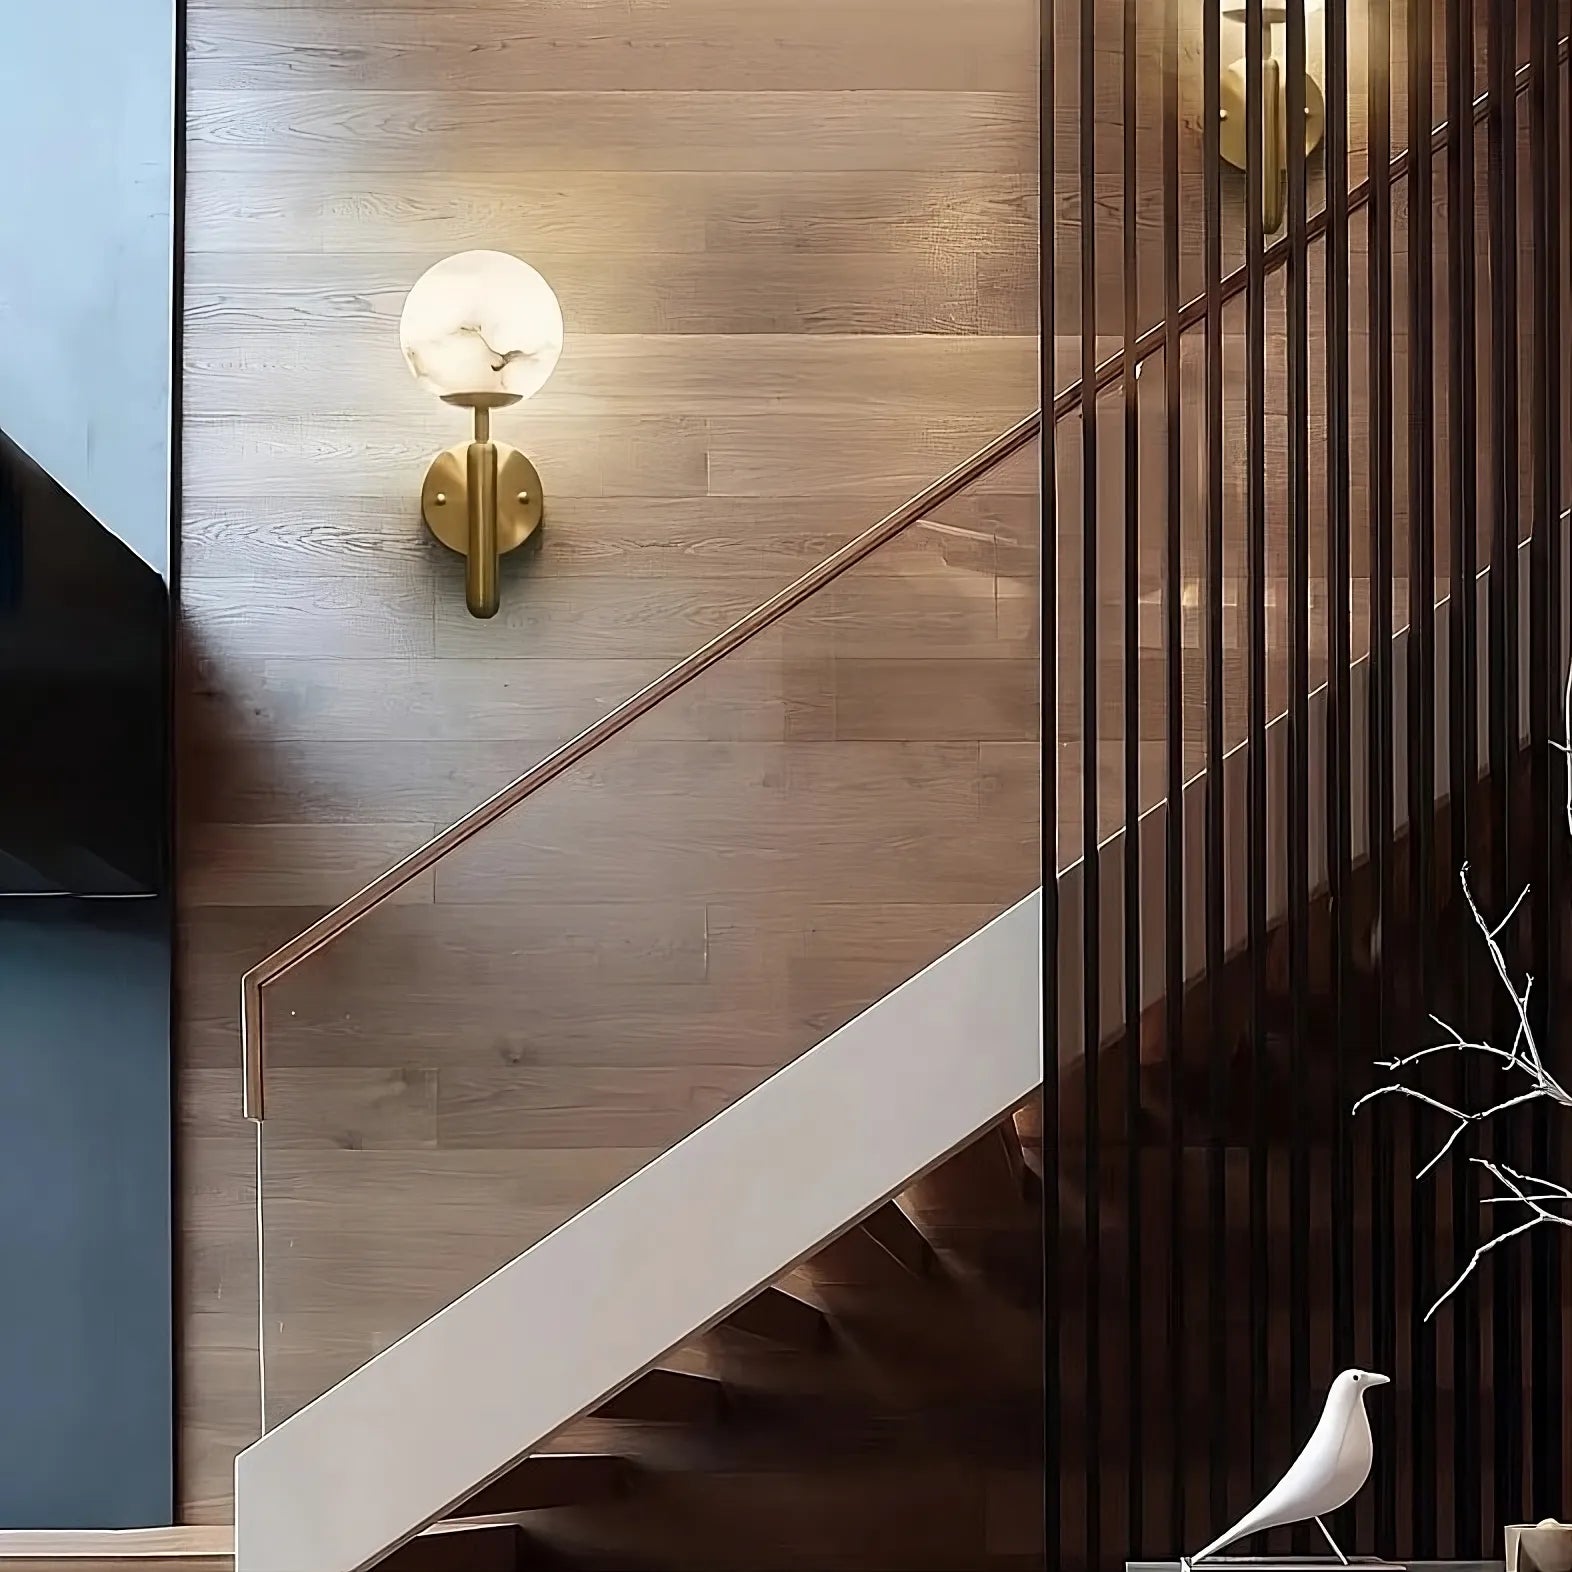 A modern staircase featuring a wooden accent wall, a sleek glass balustrade, and illuminated by stylish Natural Marble Sphere Wall Sconces from Morsale.com. A decorative white bird figurine sits at the base of the stairs next to a minimalist twig arrangement, adding unique texture to the design.